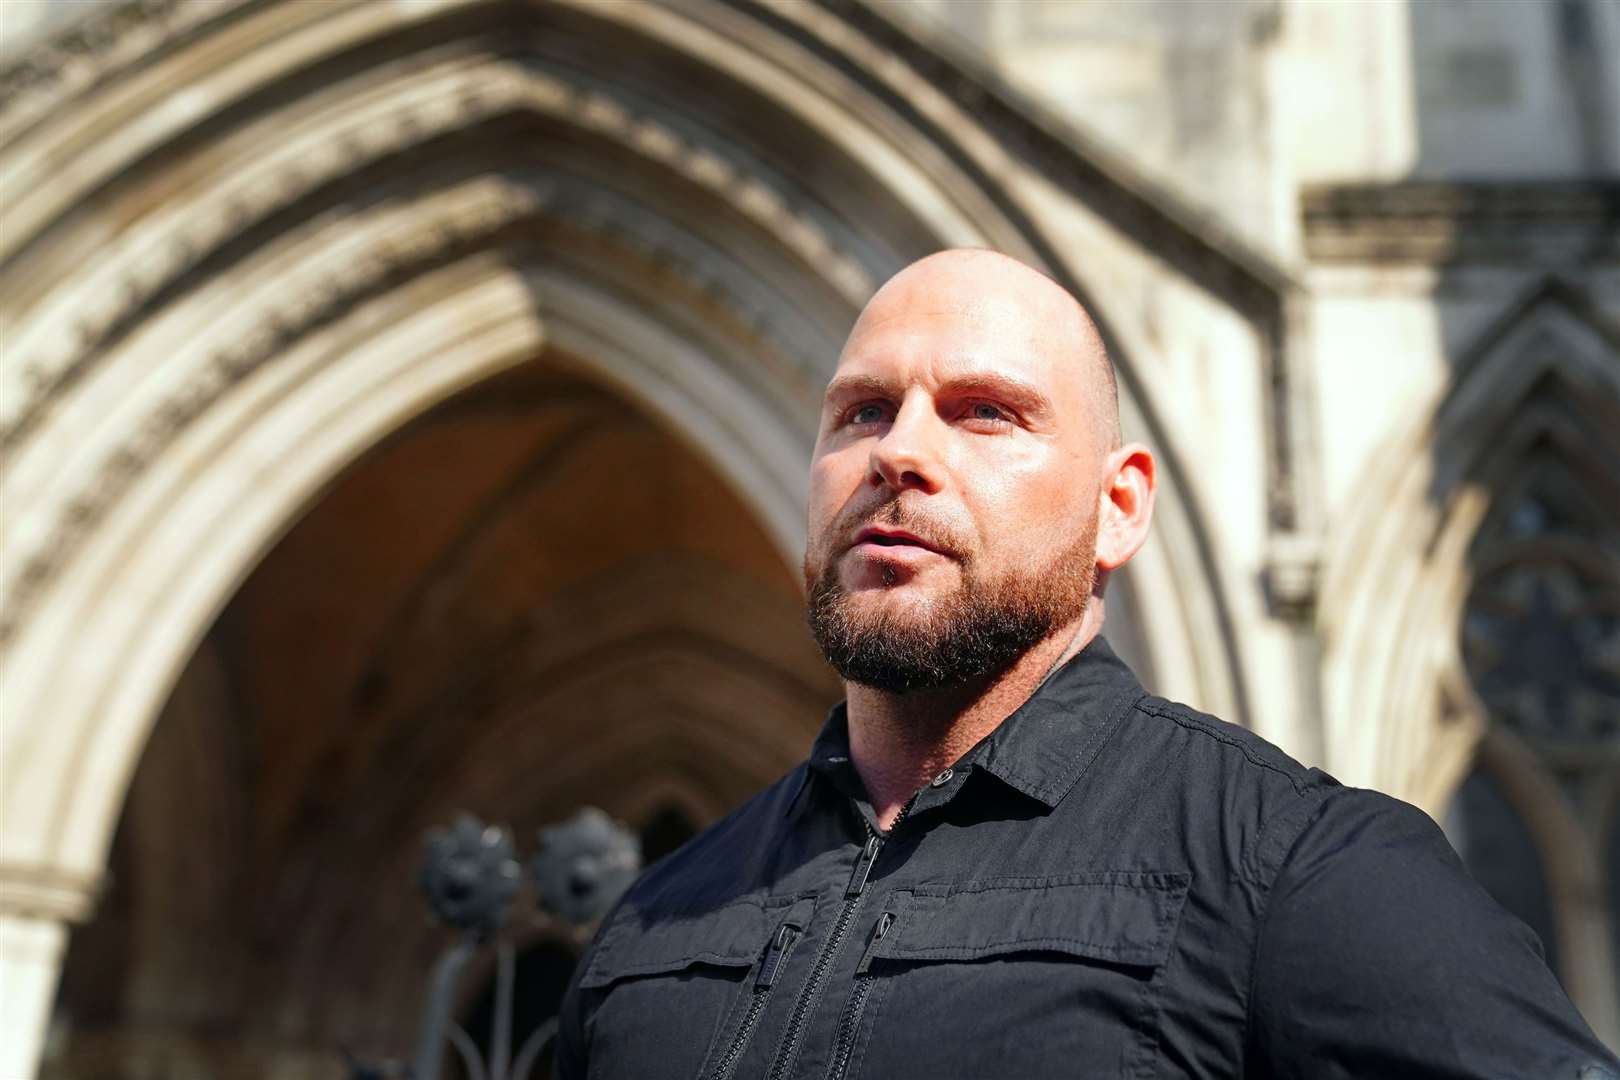 Dean Gregory outside the Royal Courts of Justice in central London (Victoria Jones/PA)